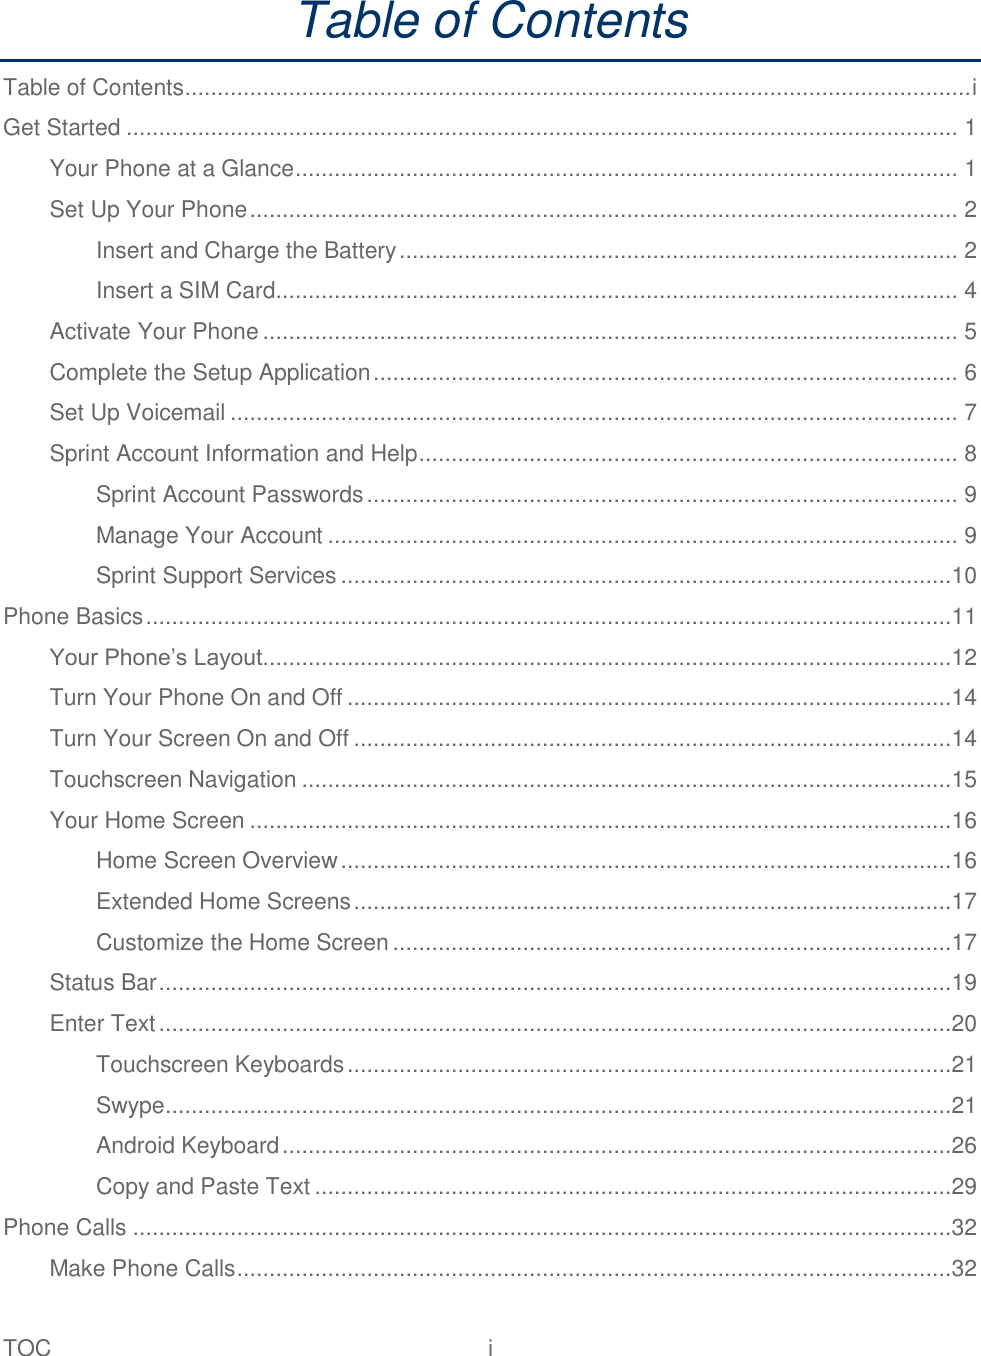 TOC  i   Table of Contents Table of Contents ......................................................................................................................... i Get Started ................................................................................................................................ 1 Your Phone at a Glance ...................................................................................................... 1 Set Up Your Phone ............................................................................................................. 2 Insert and Charge the Battery ...................................................................................... 2 Insert a SIM Card......................................................................................................... 4 Activate Your Phone ........................................................................................................... 5 Complete the Setup Application .......................................................................................... 6 Set Up Voicemail ................................................................................................................ 7 Sprint Account Information and Help ................................................................................... 8 Sprint Account Passwords ........................................................................................... 9 Manage Your Account ................................................................................................. 9 Sprint Support Services ..............................................................................................10 Phone Basics ............................................................................................................................11 Your Phone’s Layout ..........................................................................................................12 Turn Your Phone On and Off .............................................................................................14 Turn Your Screen On and Off ............................................................................................14 Touchscreen Navigation ....................................................................................................15 Your Home Screen ............................................................................................................16 Home Screen Overview ..............................................................................................16 Extended Home Screens ............................................................................................17 Customize the Home Screen ......................................................................................17 Status Bar ..........................................................................................................................19 Enter Text ..........................................................................................................................20 Touchscreen Keyboards .............................................................................................21 Swype .........................................................................................................................21 Android Keyboard .......................................................................................................26 Copy and Paste Text ..................................................................................................29 Phone Calls ..............................................................................................................................32 Make Phone Calls ..............................................................................................................32 